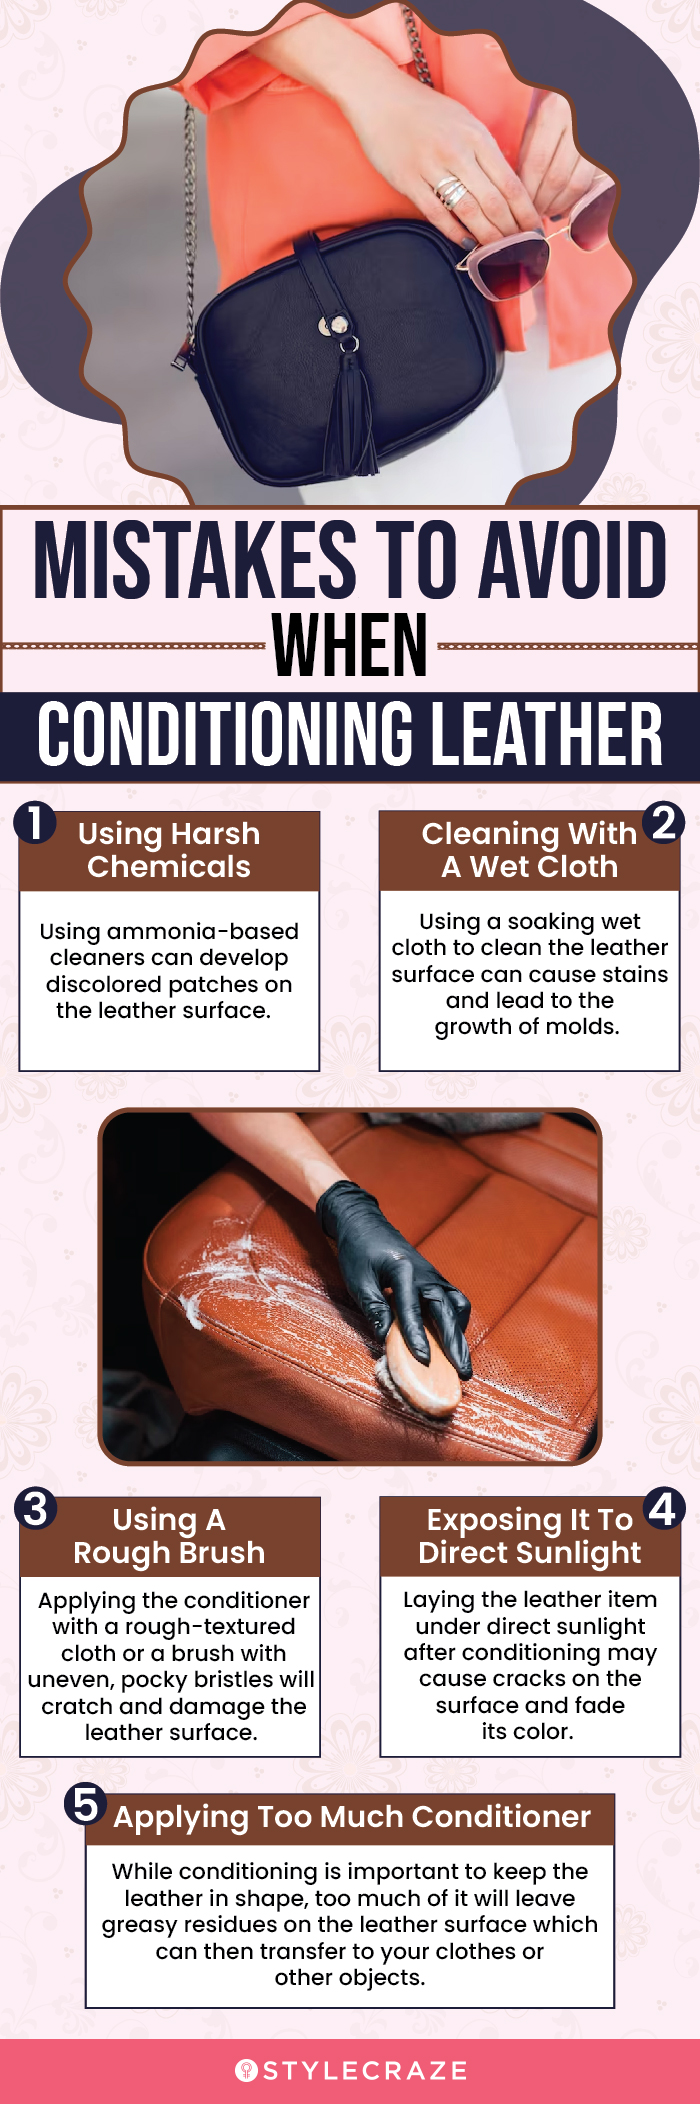 Mistakes To Avoid When Conditioning Leather(infographic)